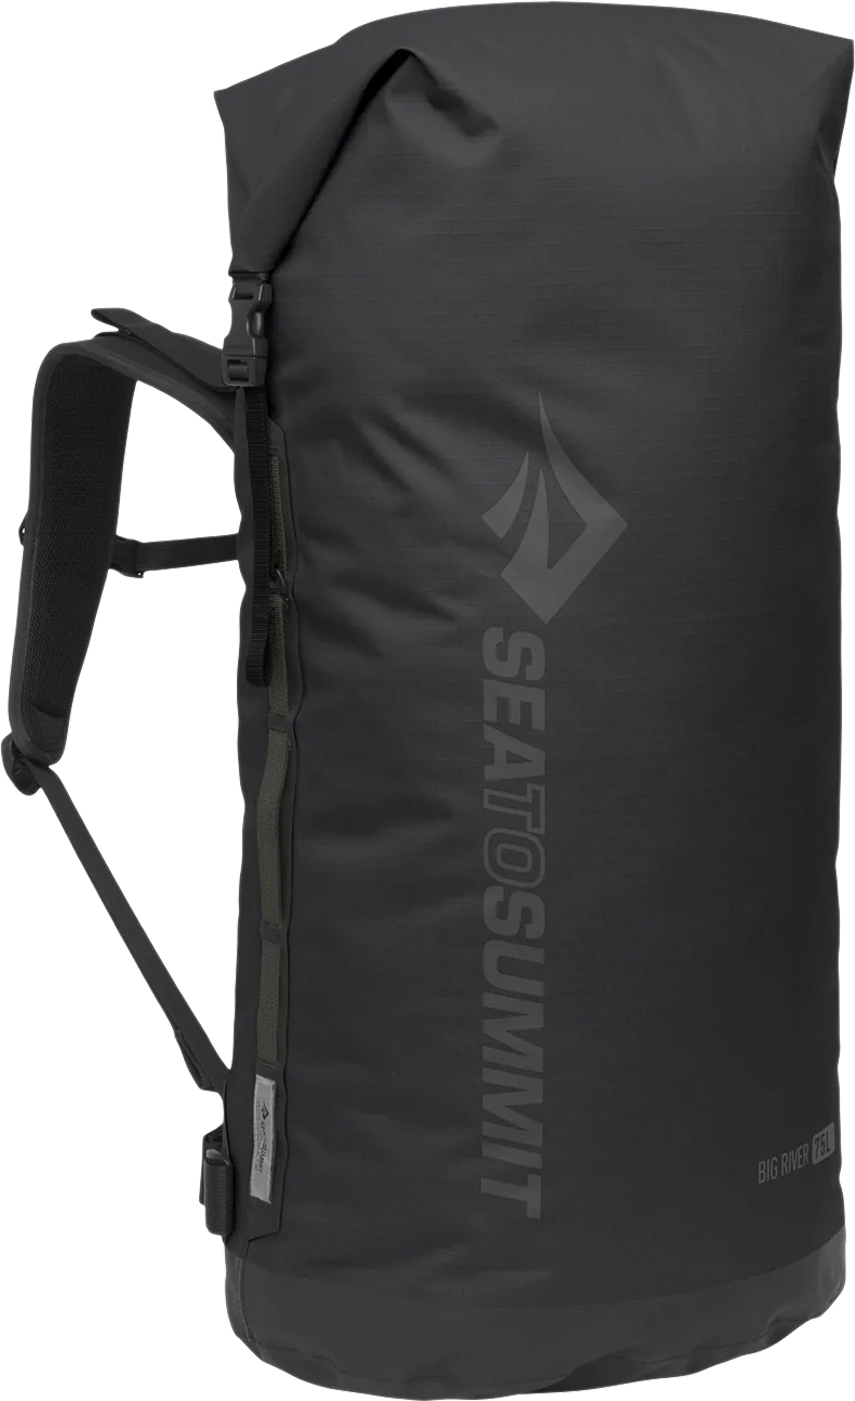 Sea to Summit Big River Dry Backpack 75L schwarz